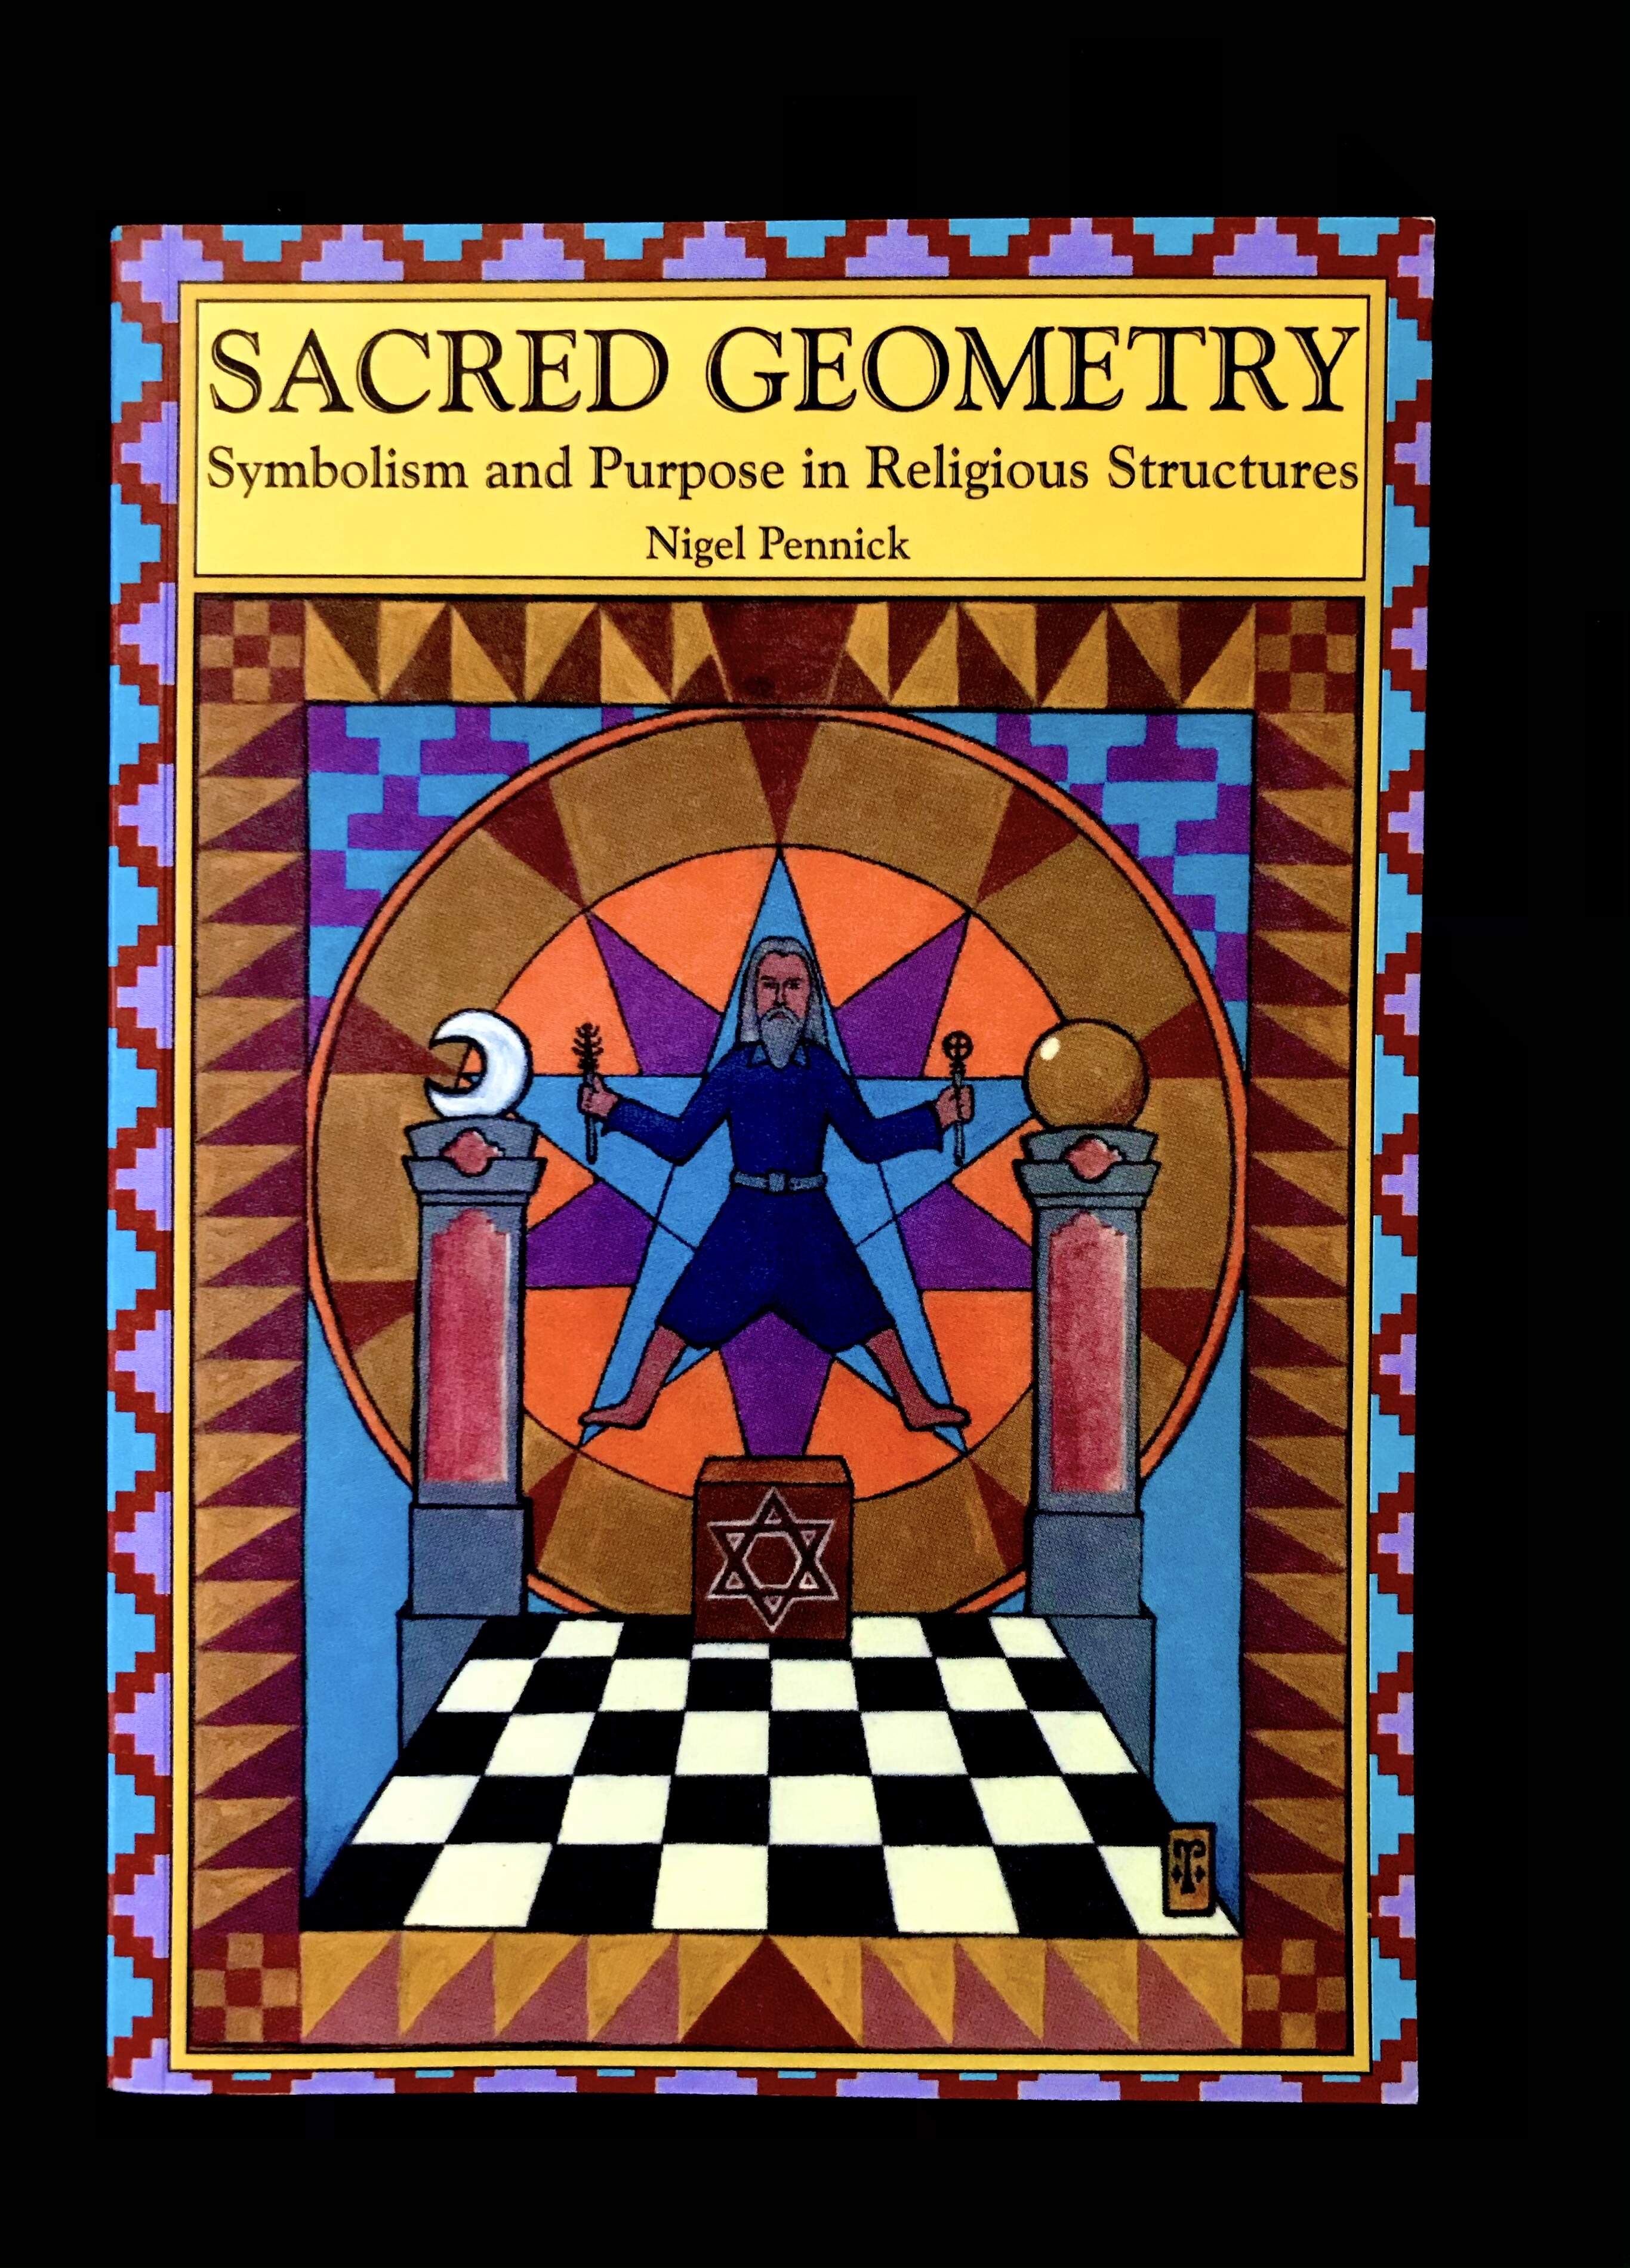 Sacred Geometry: Symbolism and Purpose in Religious Structure by Nigel Pennick